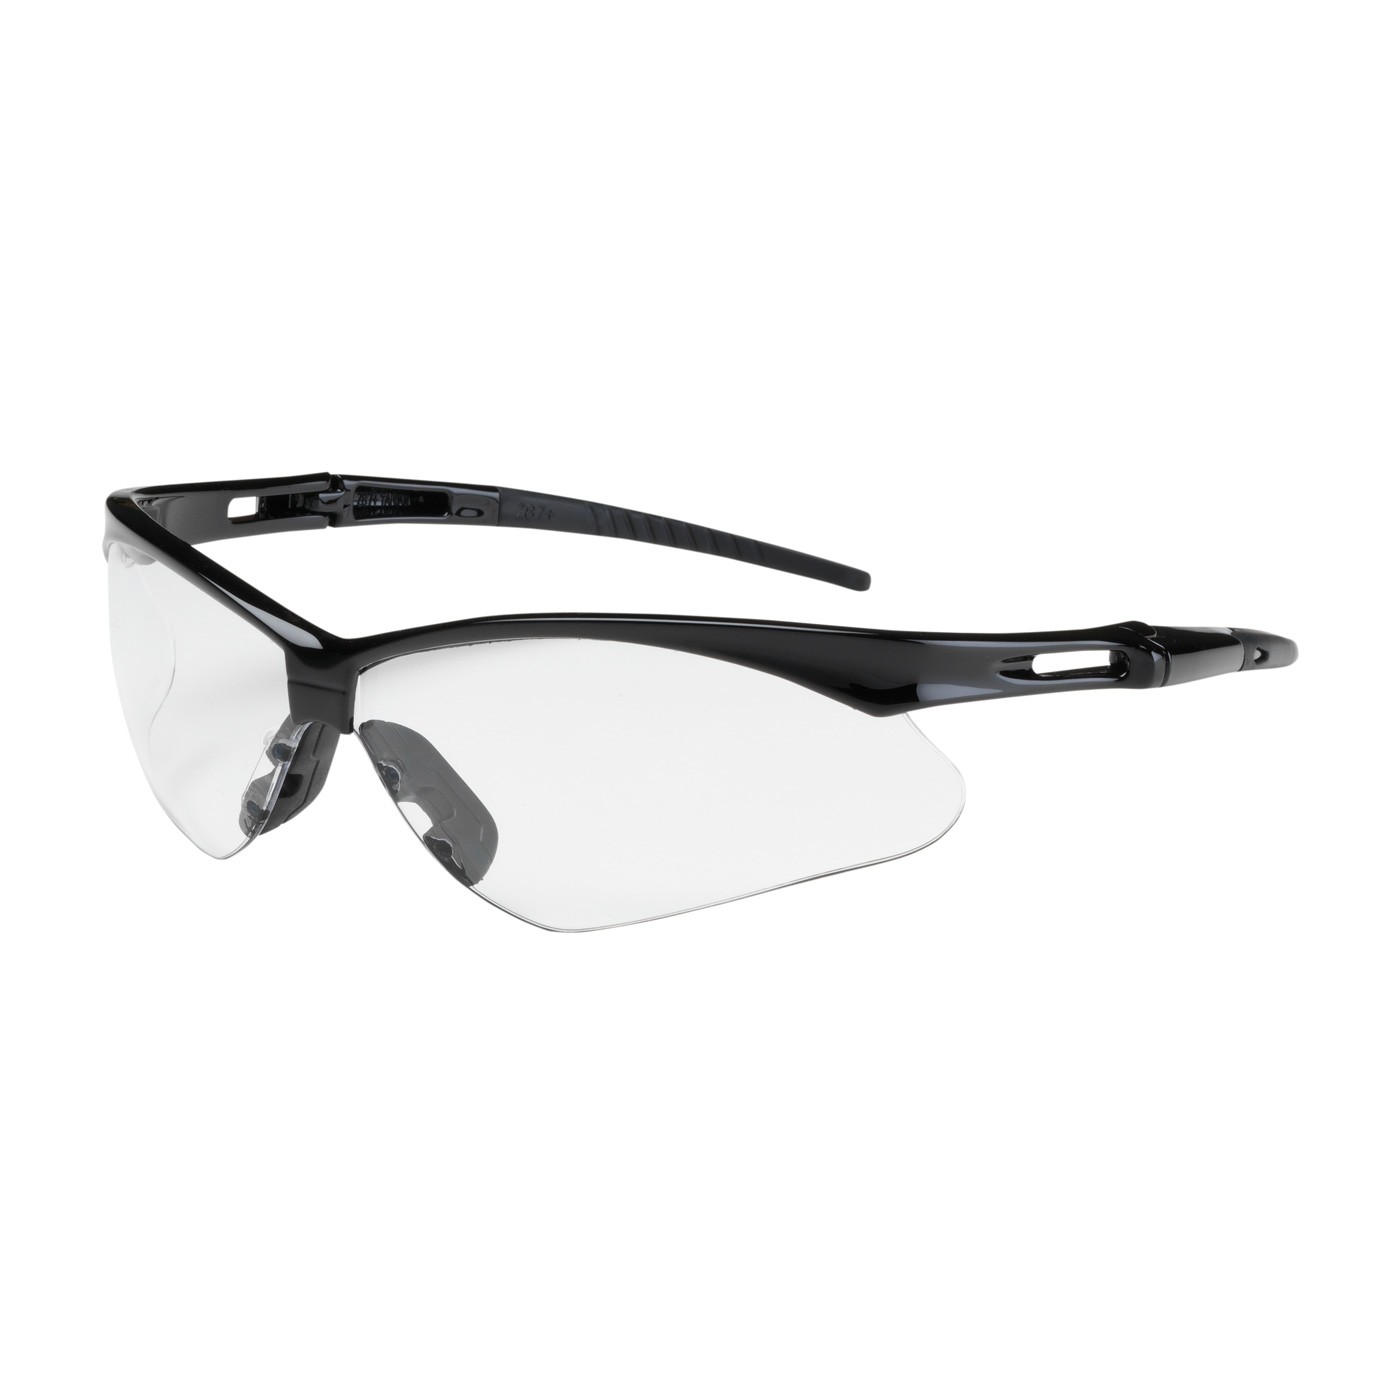 Anser™ Semi-Rimless Safety Glasses with Black Frame, Clear Lens and Anti-Scratch / Anti-Fog Coating  (#250-AN-10111)